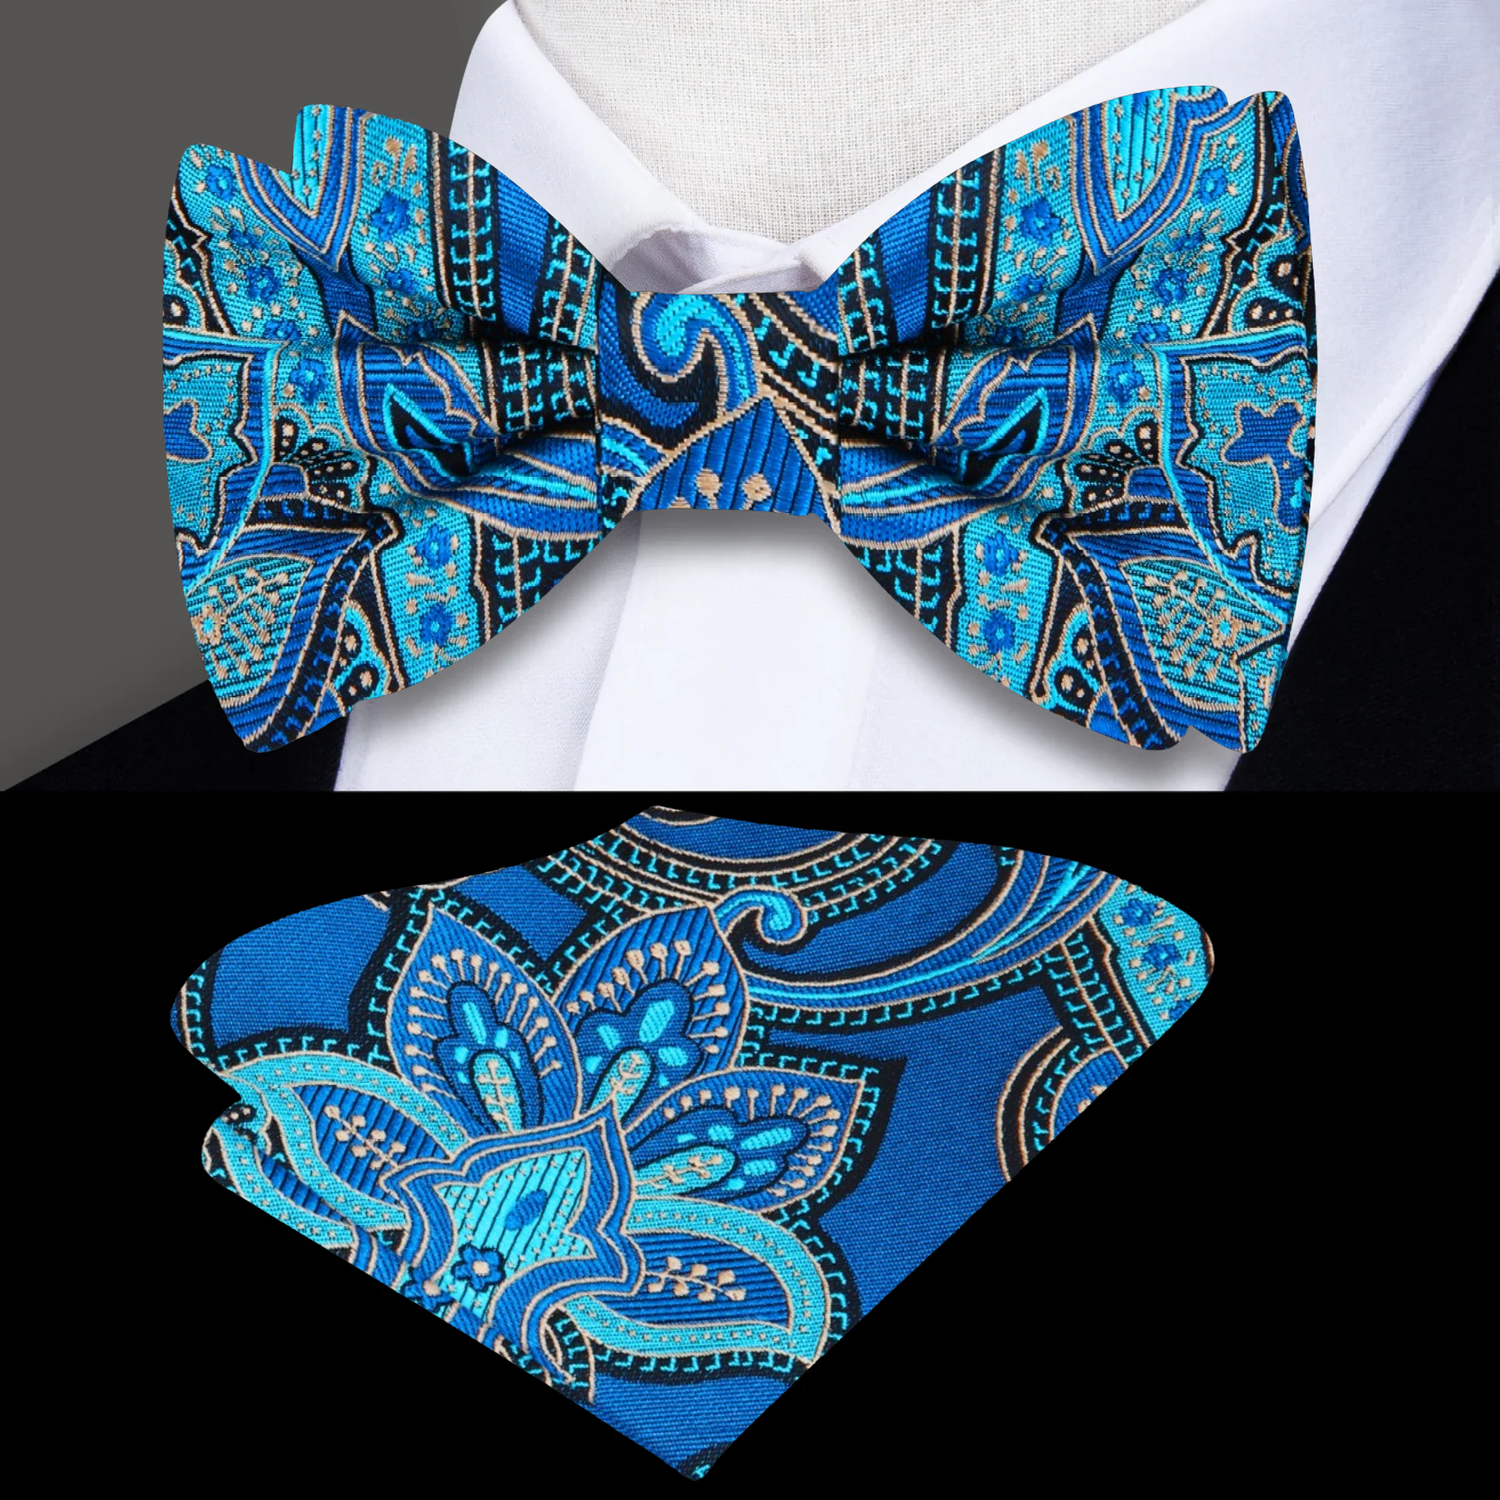 A Teal Blue, Black Abstract Floral Pattern Silk Bow Tie, Matching Pocket Square